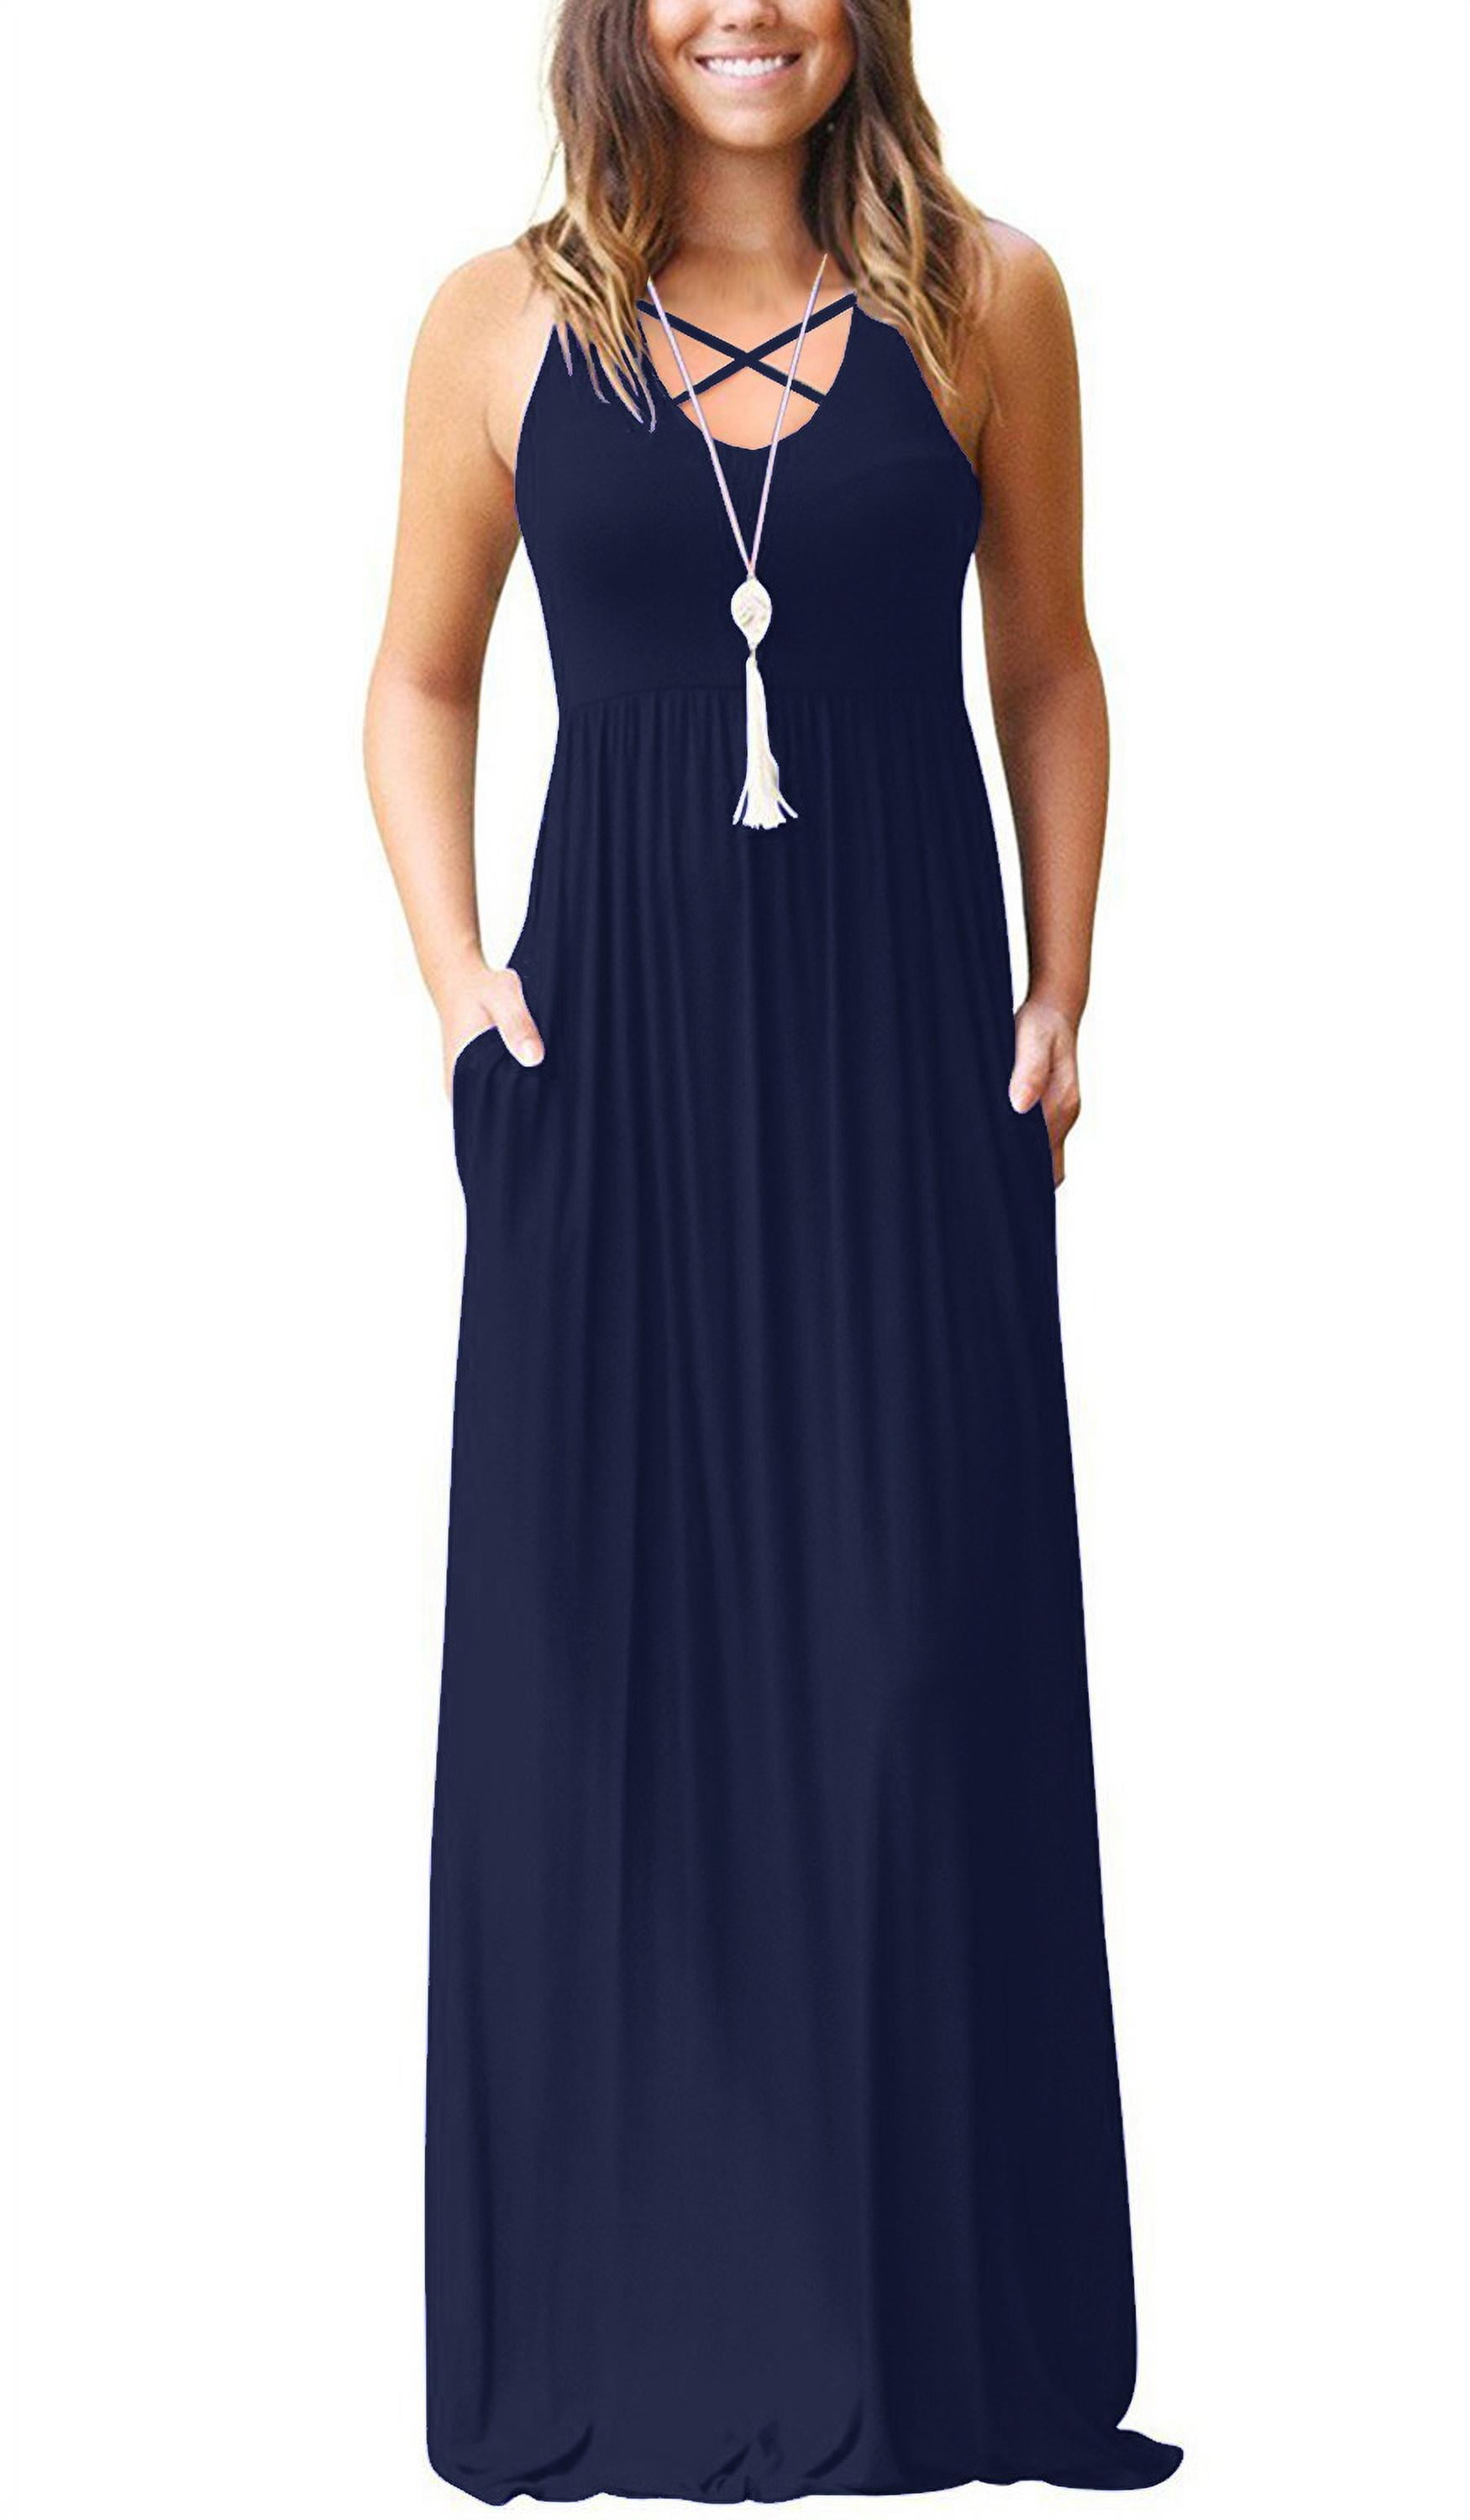 Womens Ladies Plus Size Plain Racer Back Stretchy Long Jersey Maxi Dress 8 to 26 